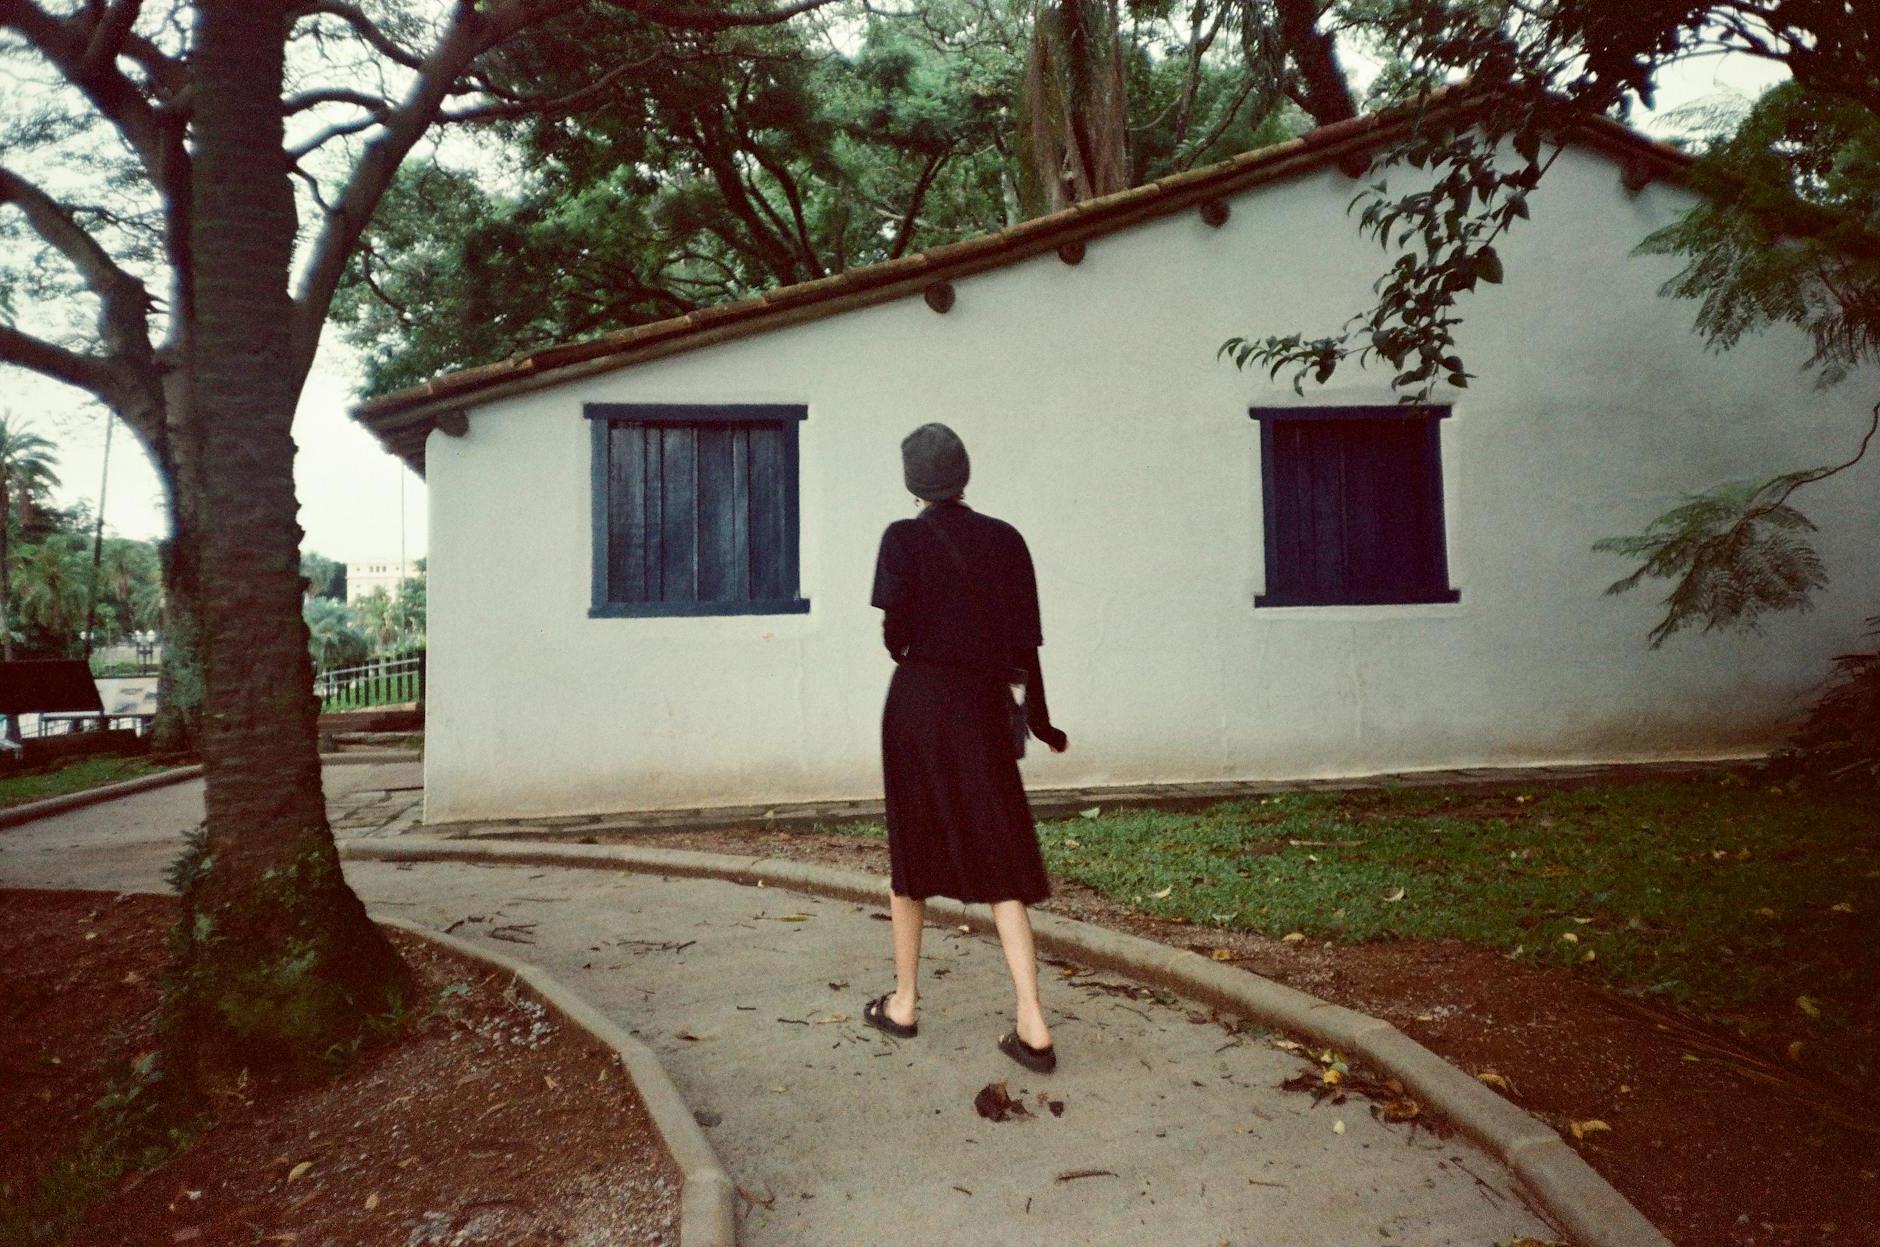 A woman walking down a path in front of a house